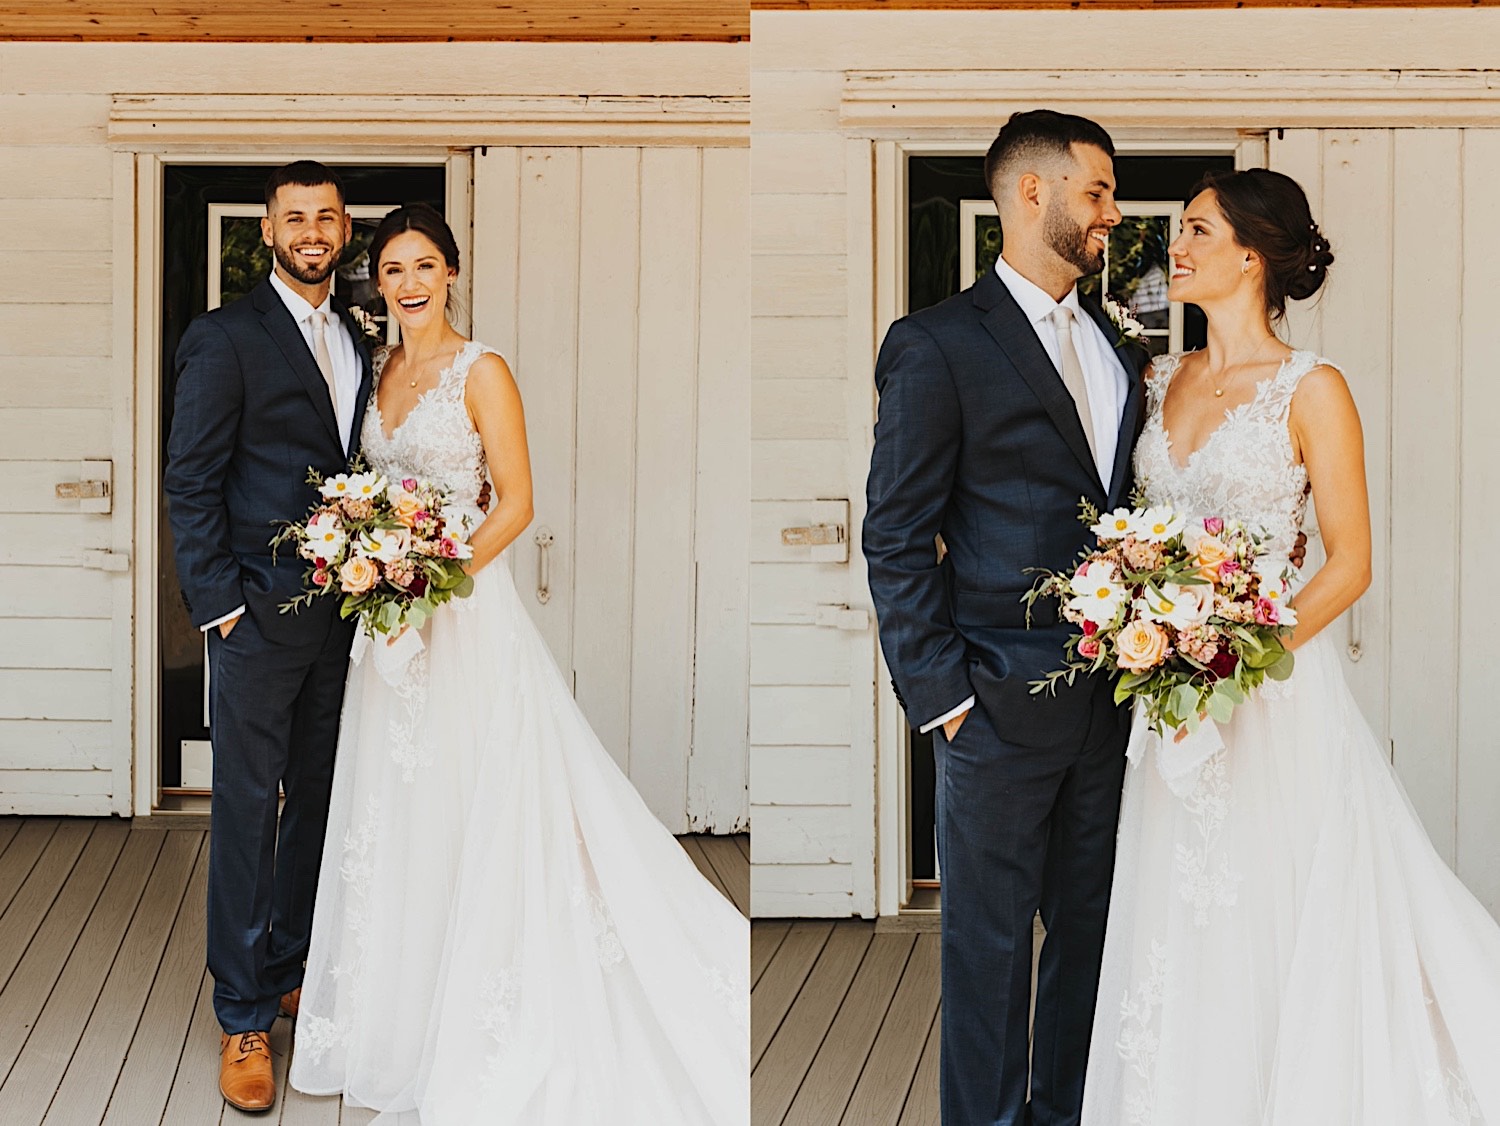 2 photos side by side, the left is of a bride and groom smiling at the camera while standing next to one another, the right is of them in the same position smiling at one another instead